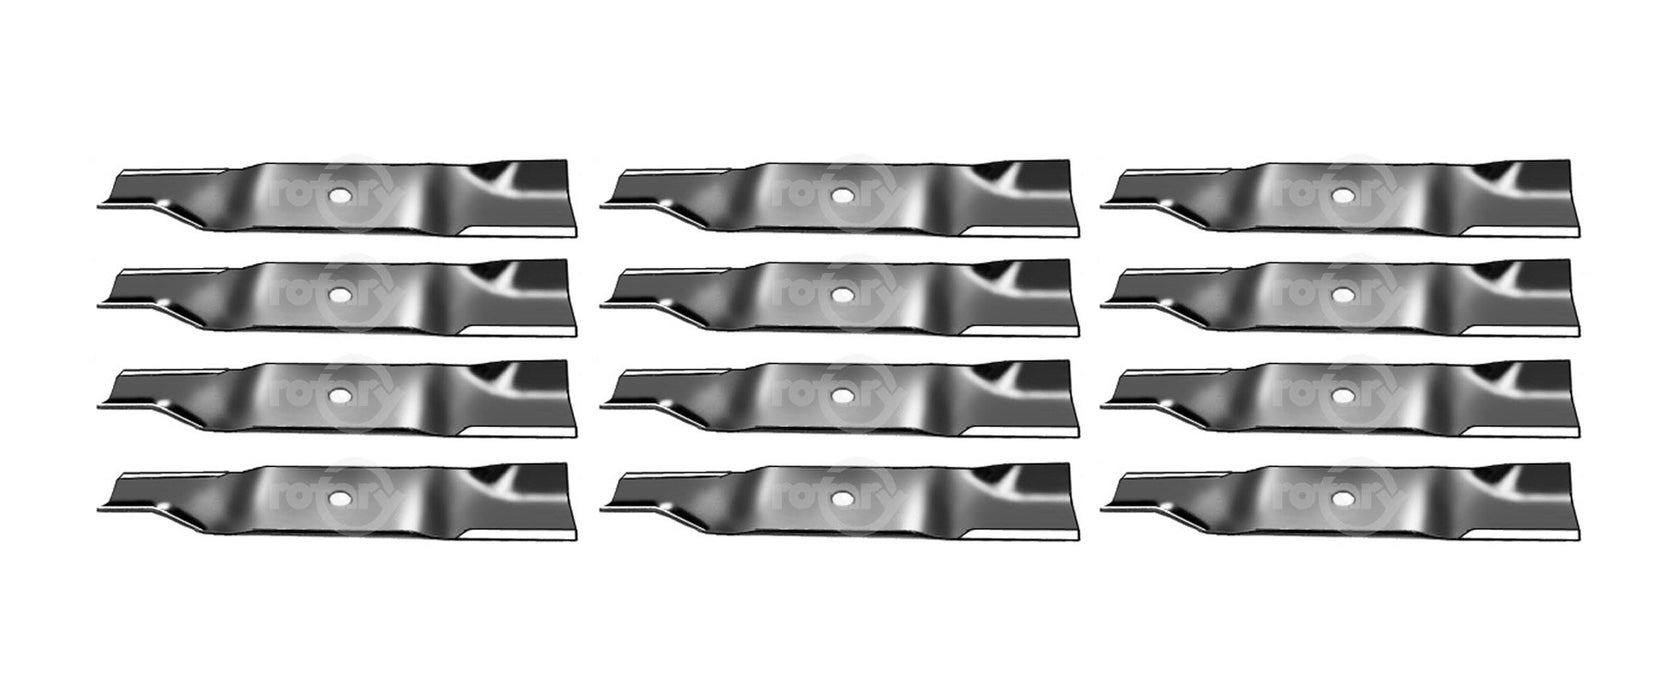 12 Pack Blades For Cub Cadet MTD 02005017 1005336 742-04417 942-04417 942-04417A